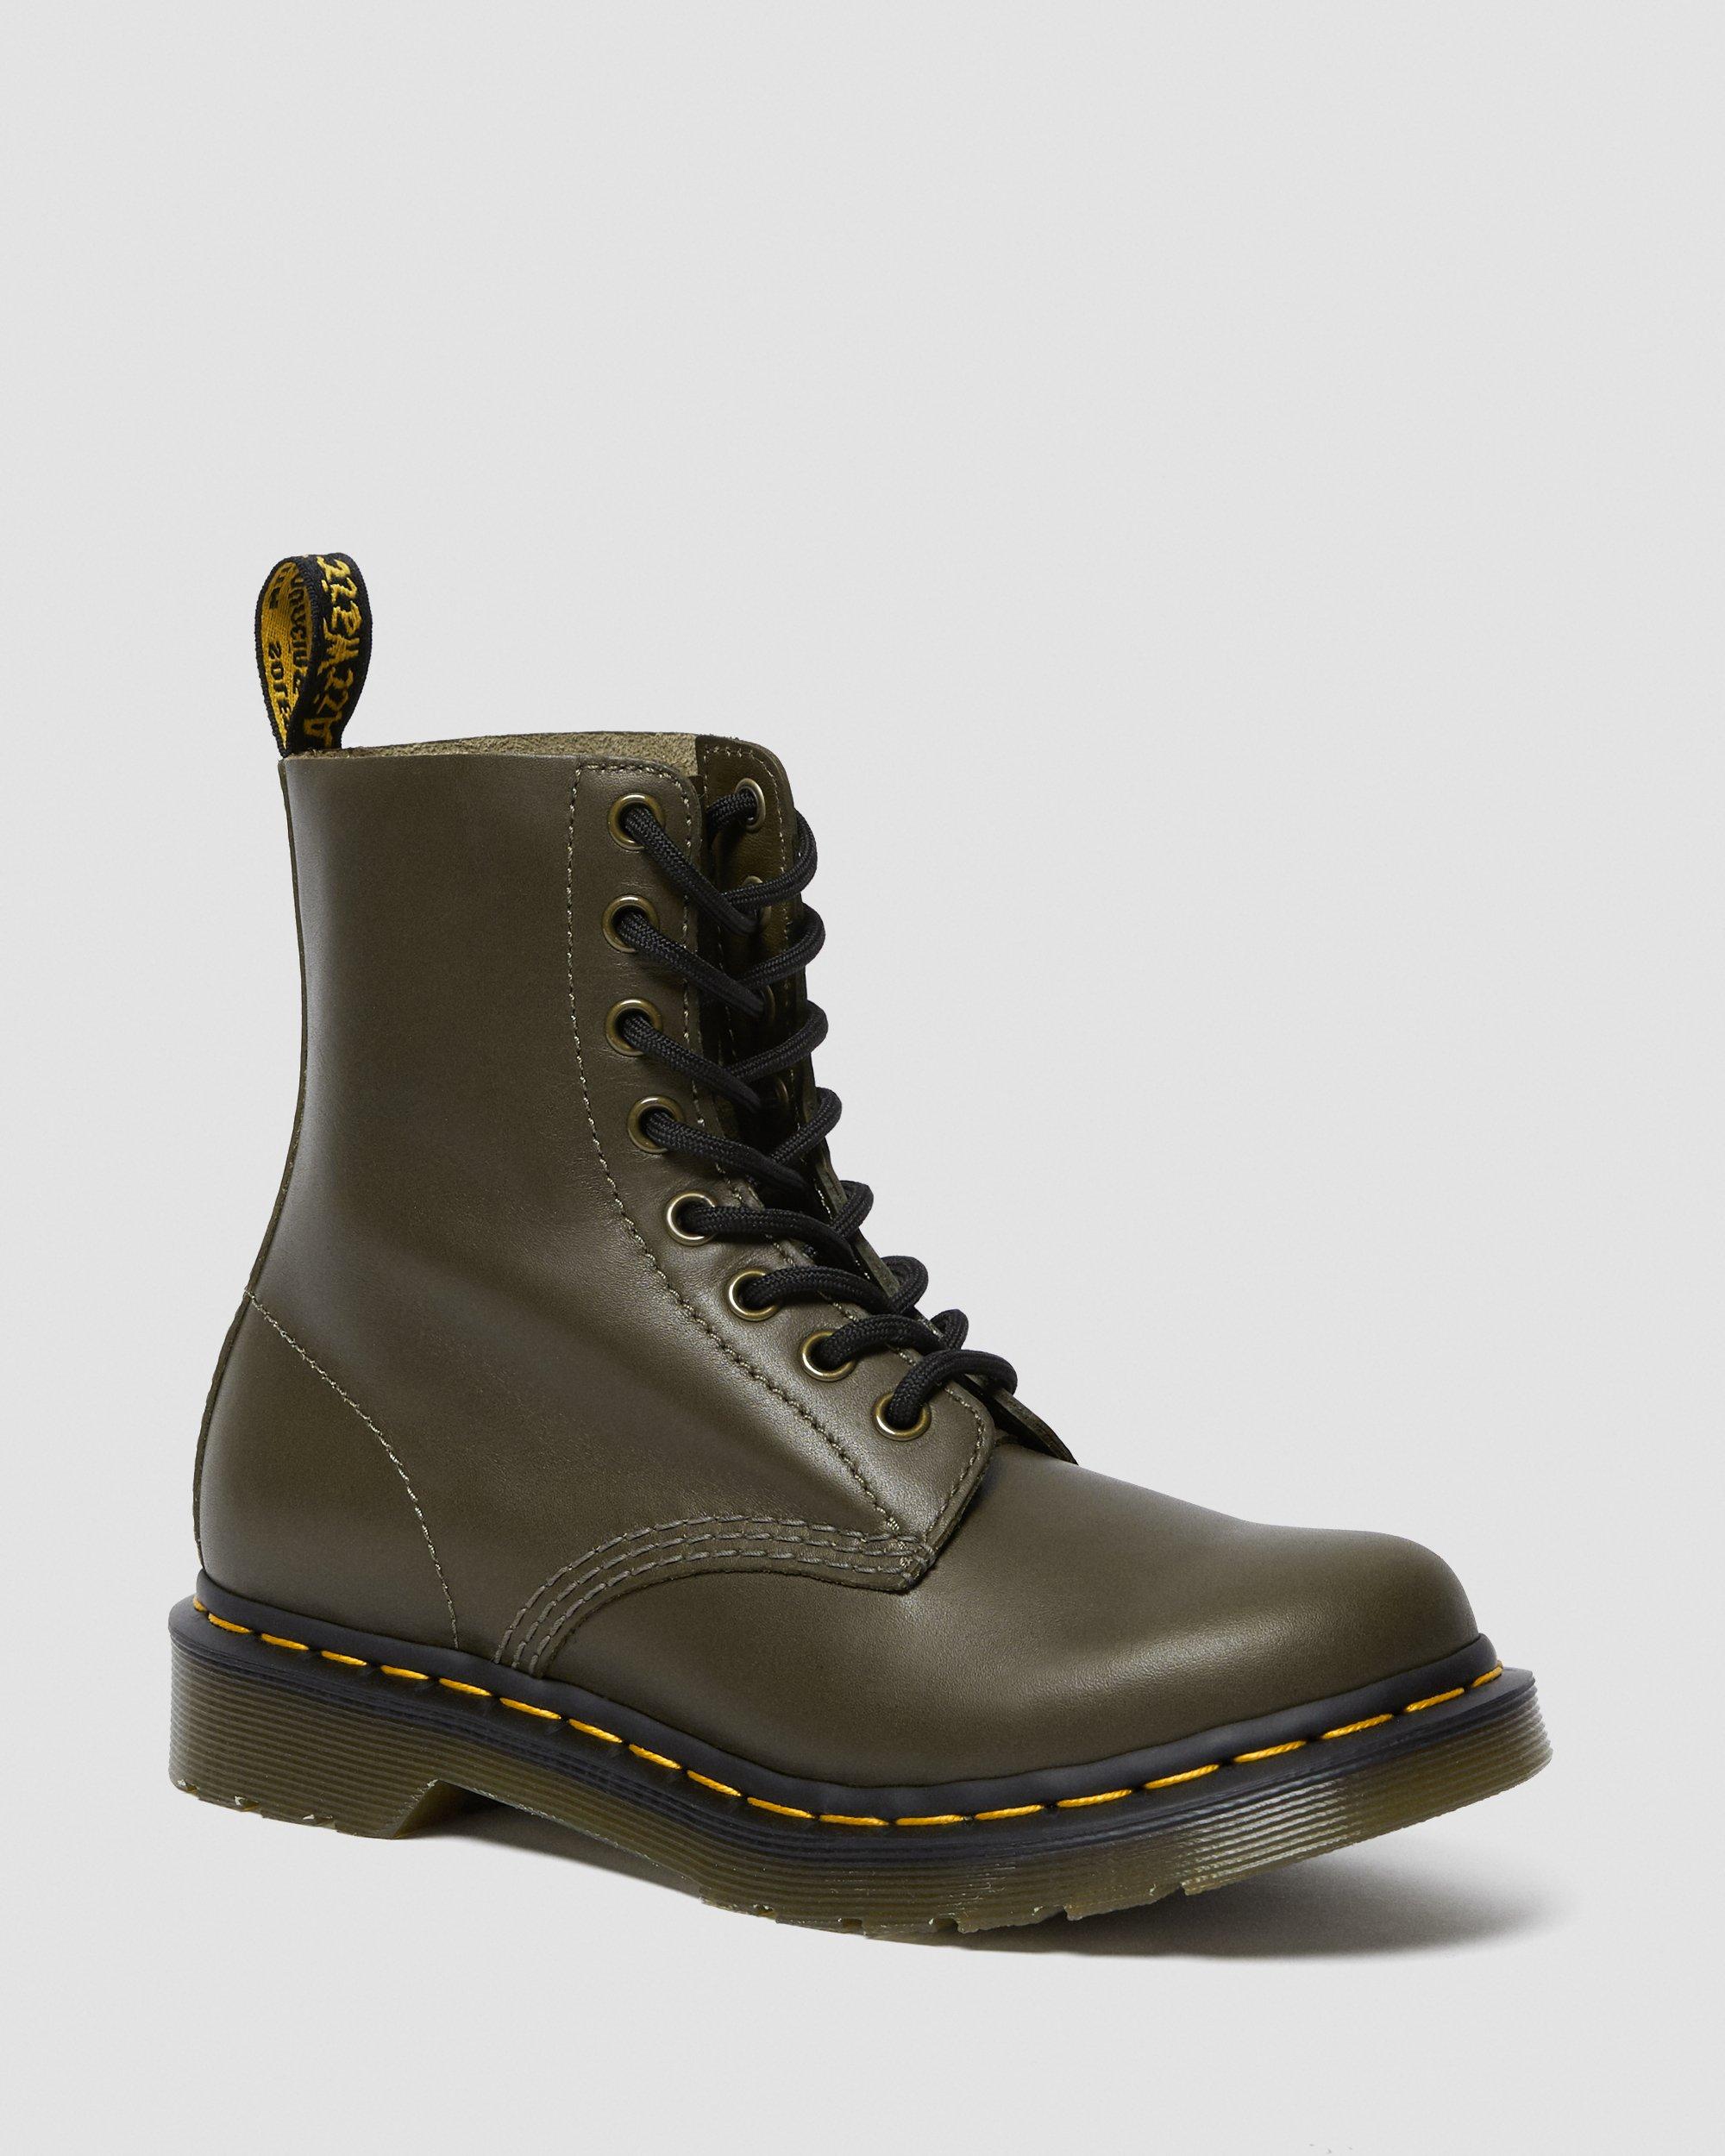 1460 Pascal Women's Wanama Leather Boots in Olive | Dr. Martens